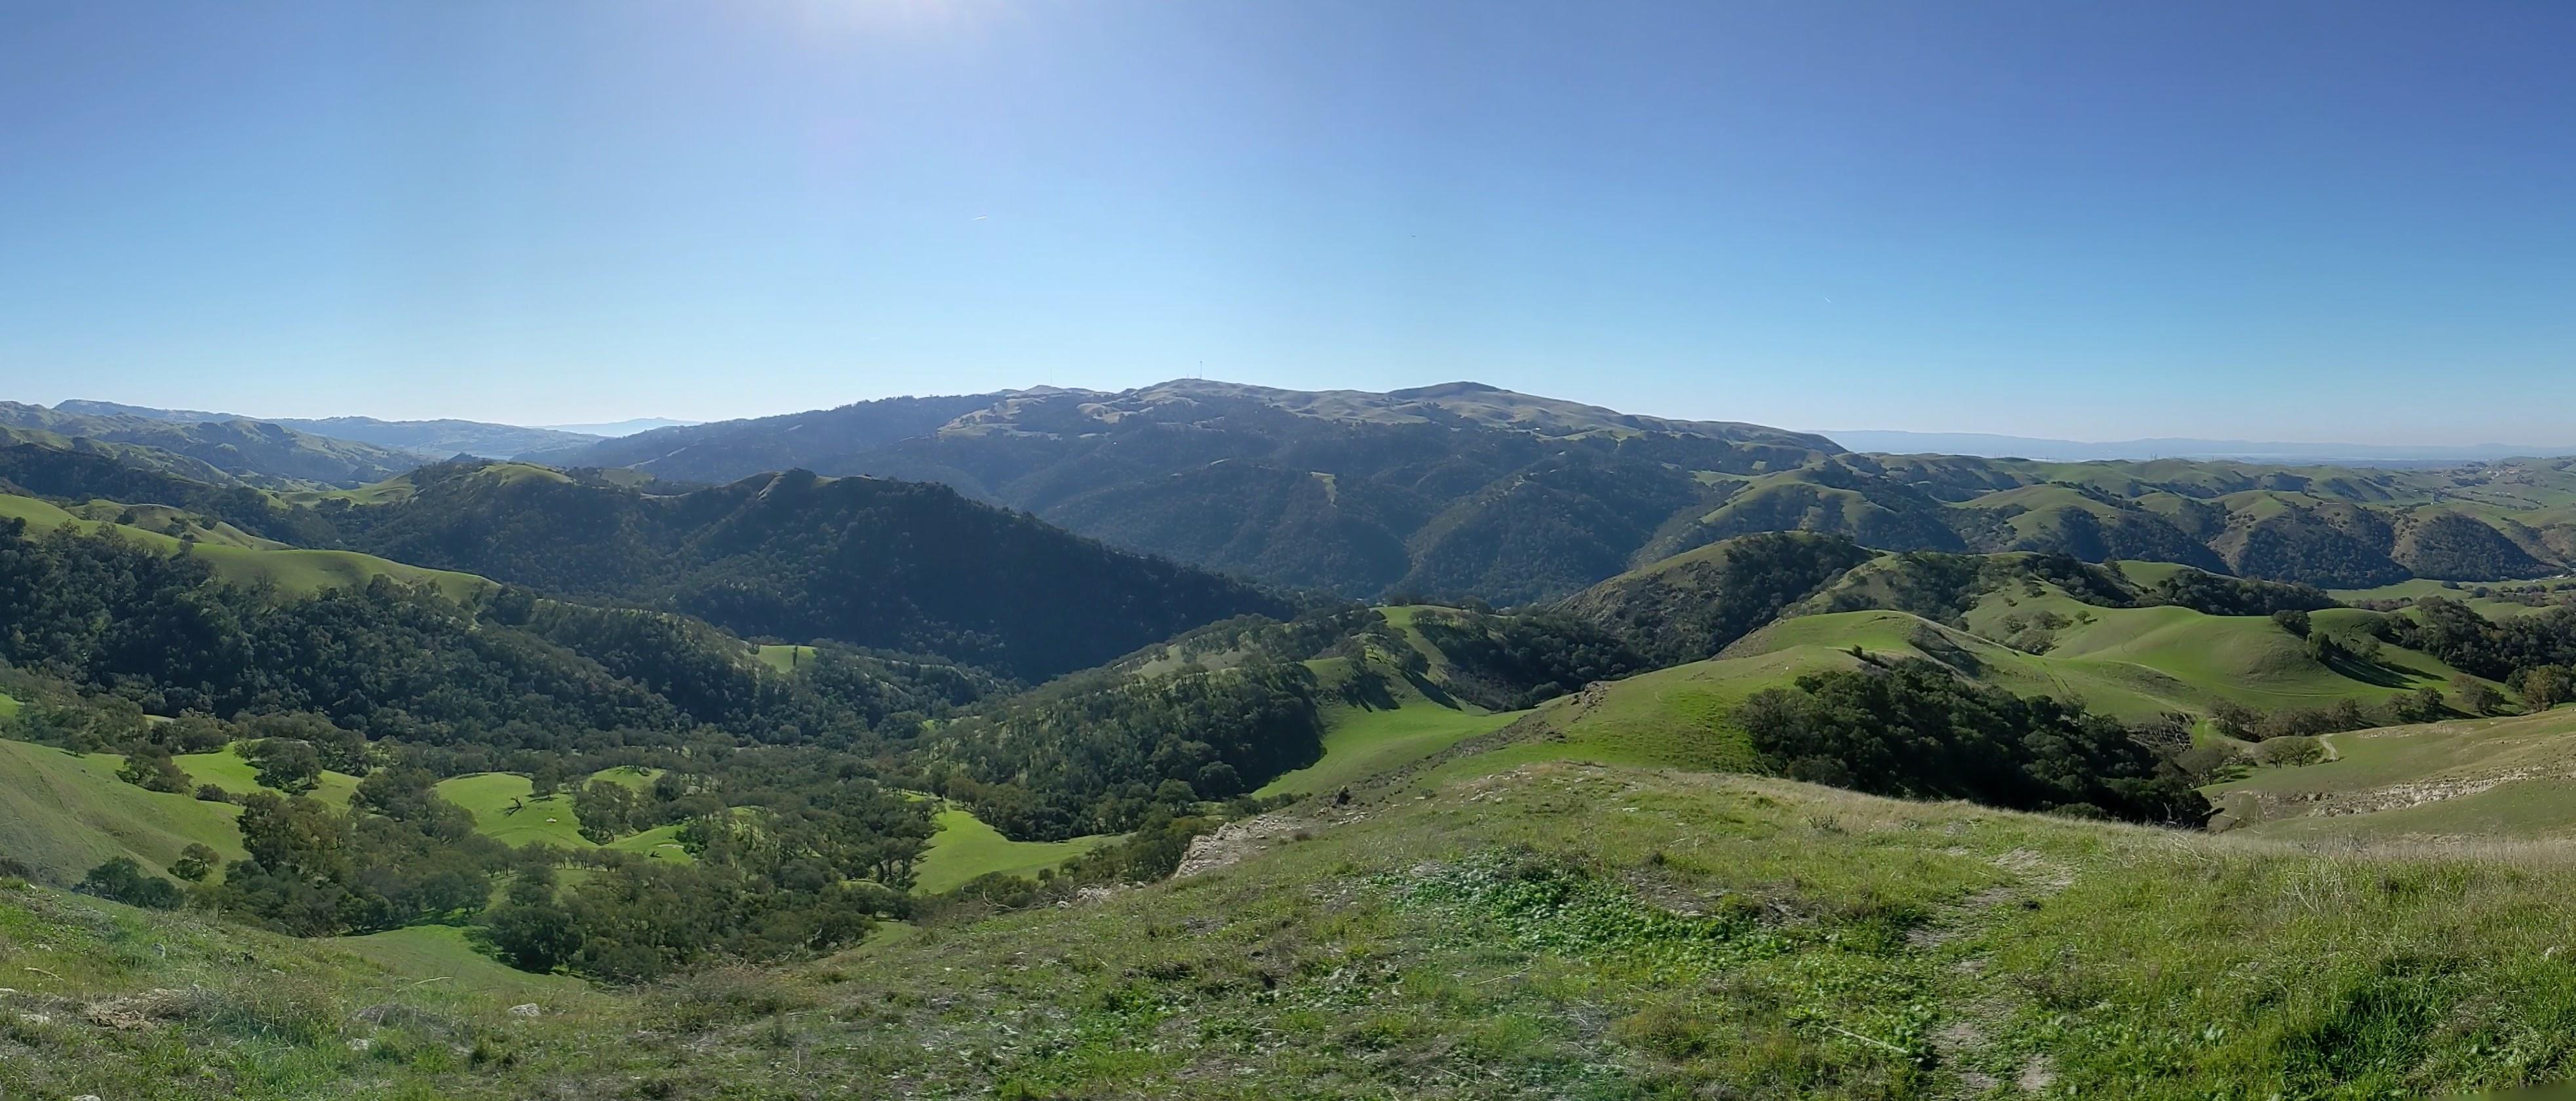 View from the summit toward the Mission Peak and Mount Allison